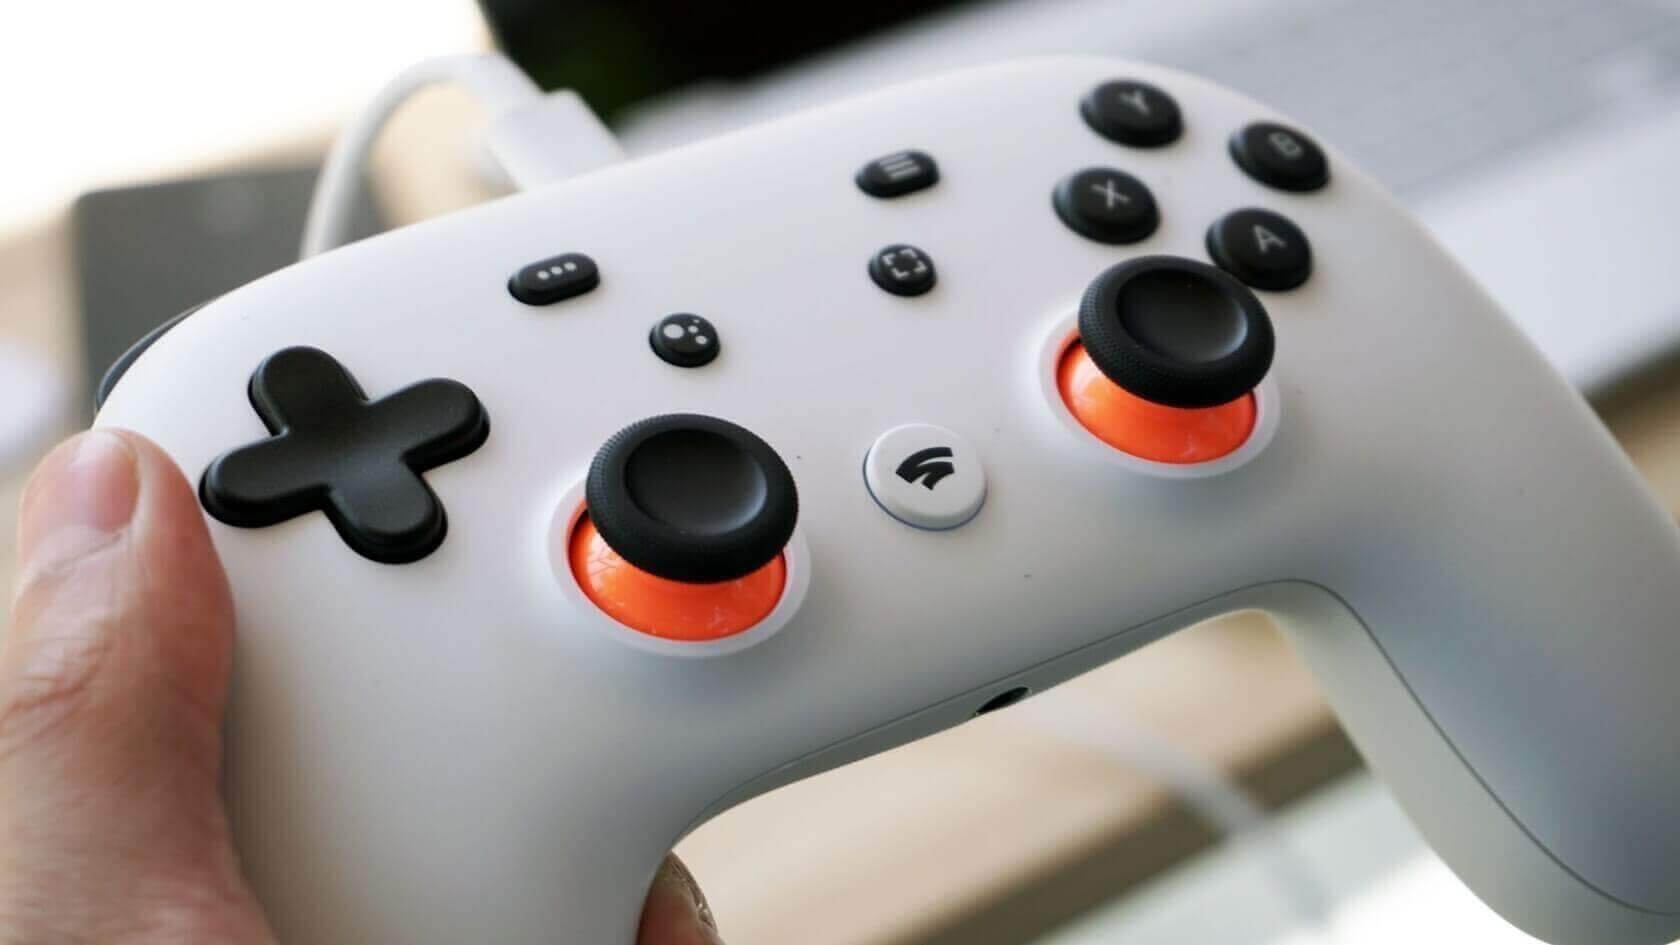 Stadia launch title creator says devs fear Google is 'just going to cancel' the service